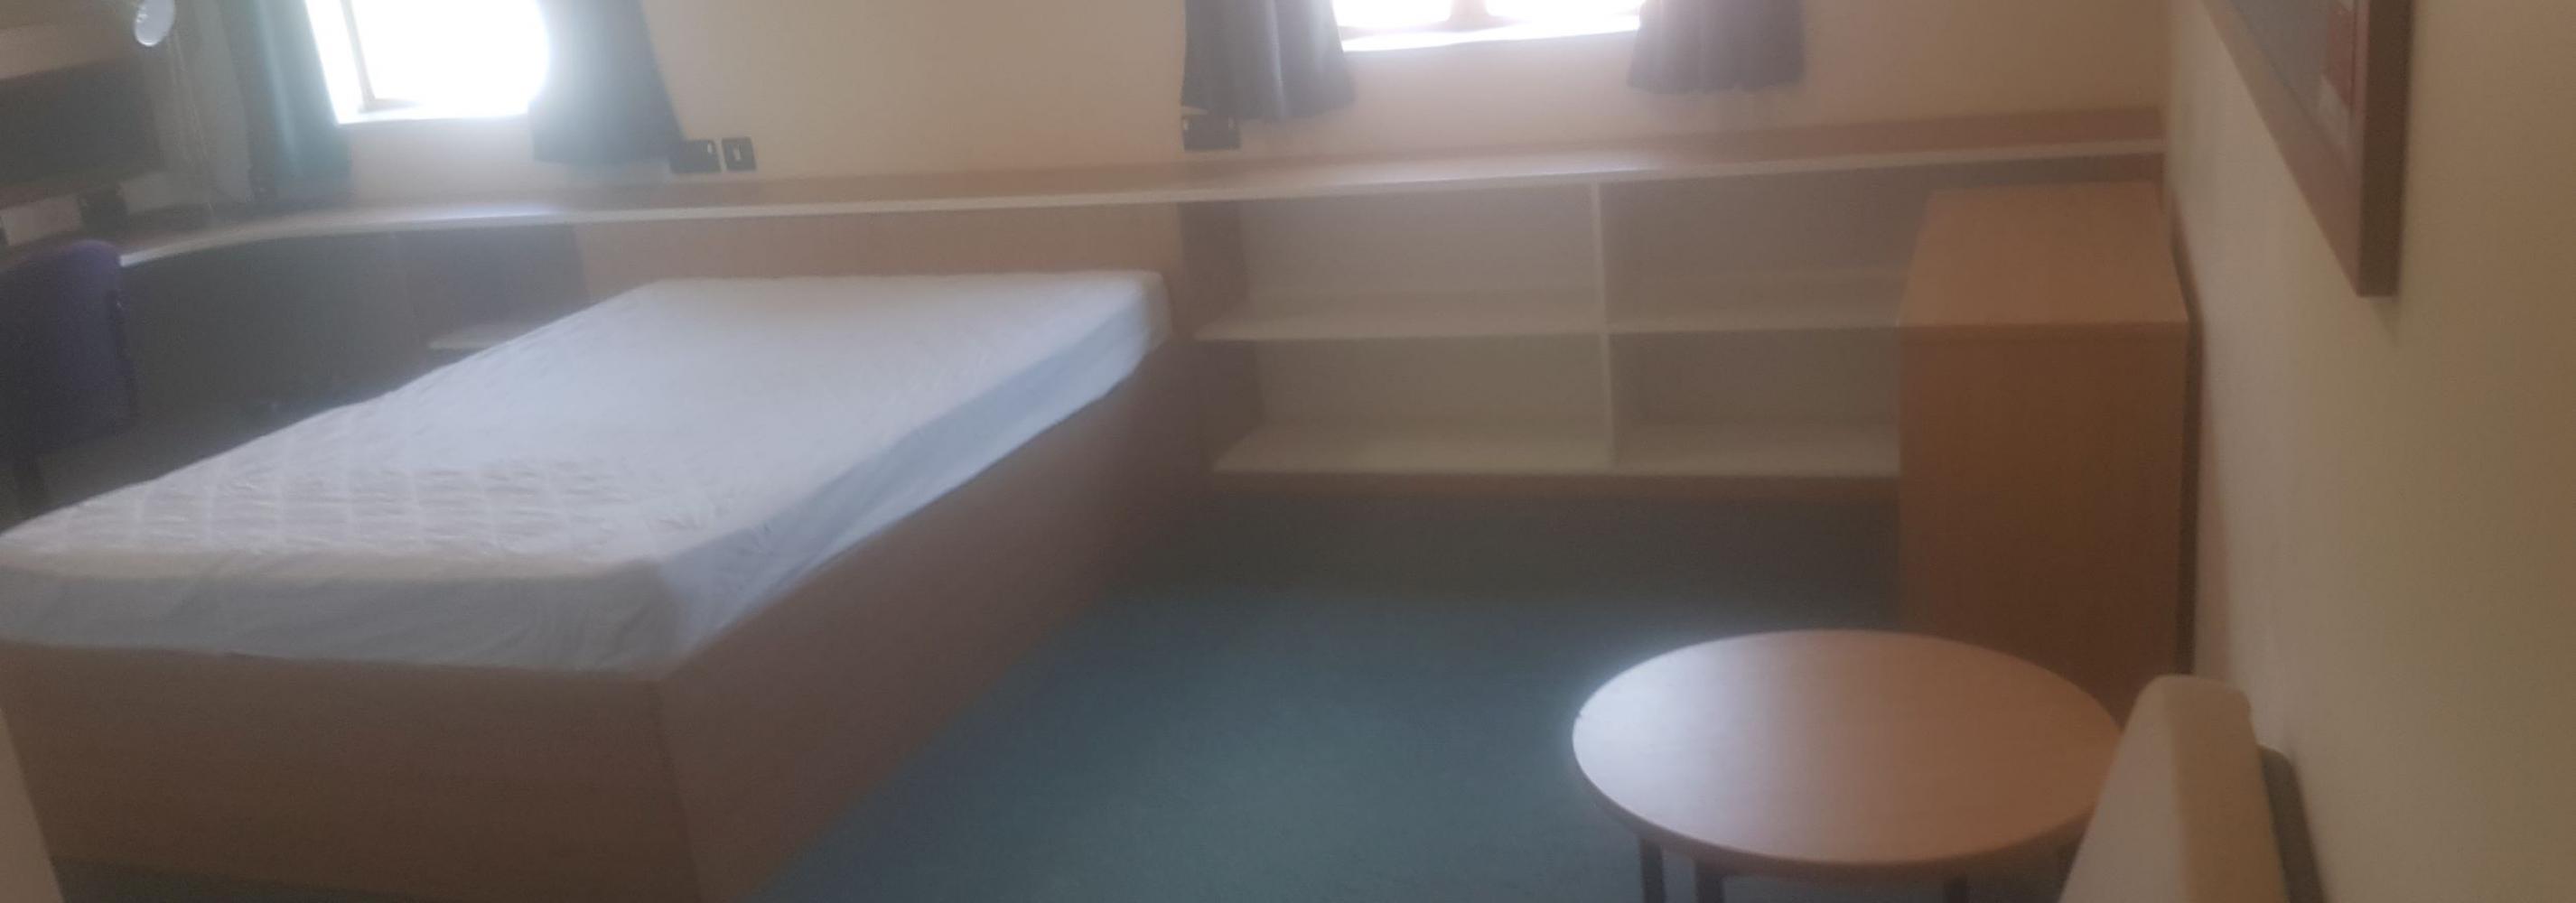 Large double room with double bed, chair, storage, coffee table and two windows.